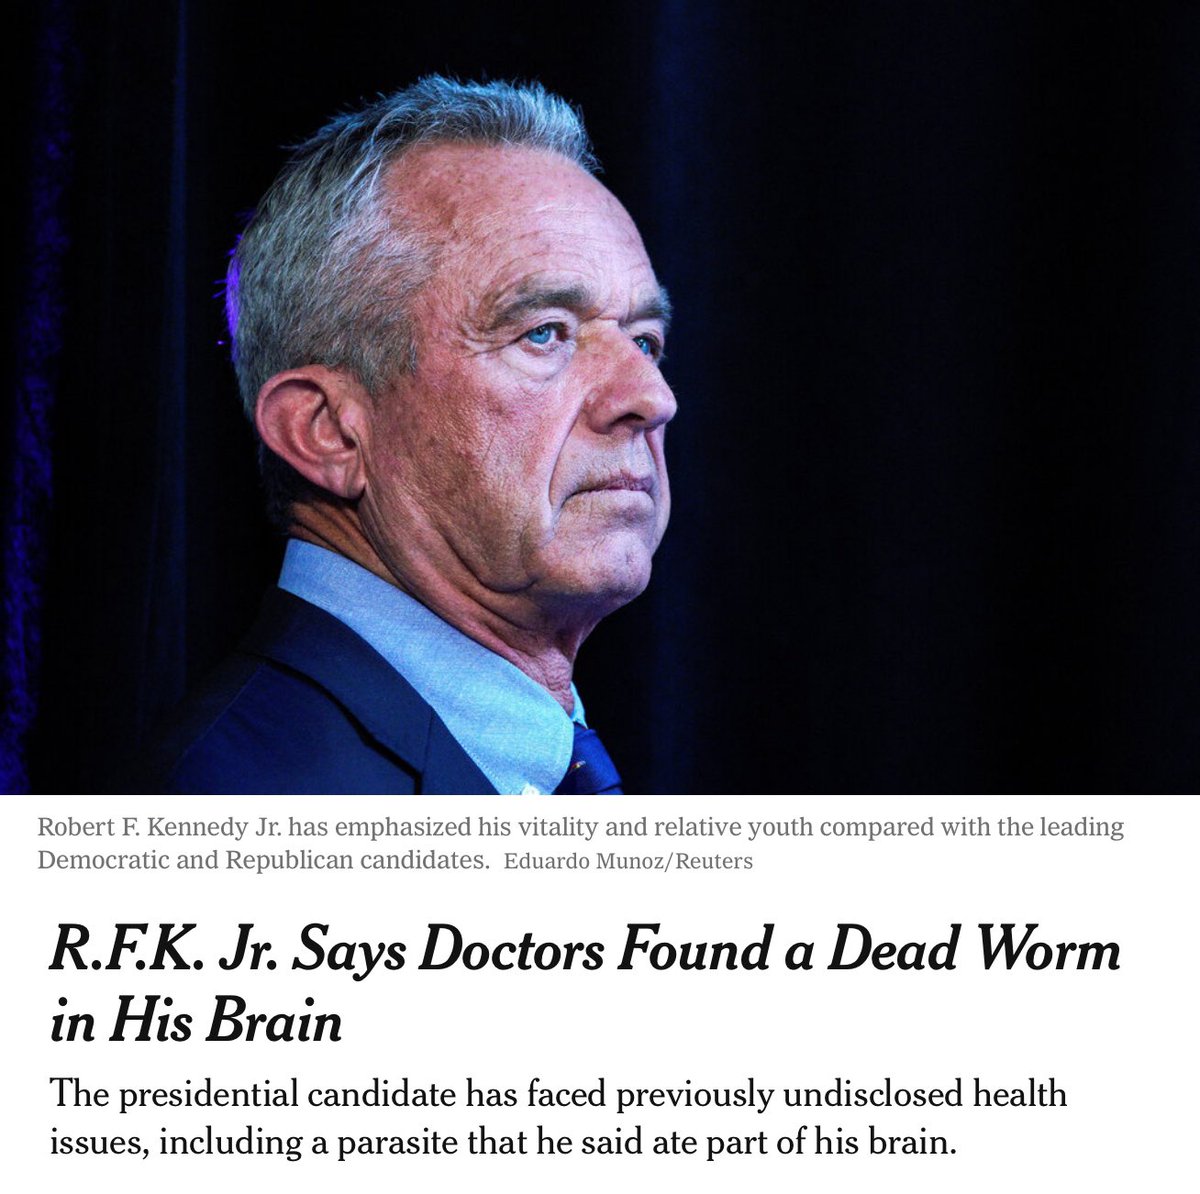 NEW Robert Kennedy Jr. has pitched himself as a younger, healthier alternative to Biden and Trump, but the New York Times obtained a 2012 deposition where Kennedy admitted that “a worm got into my brain and ate a portion of it and then died.” Kennedy testified at the time…